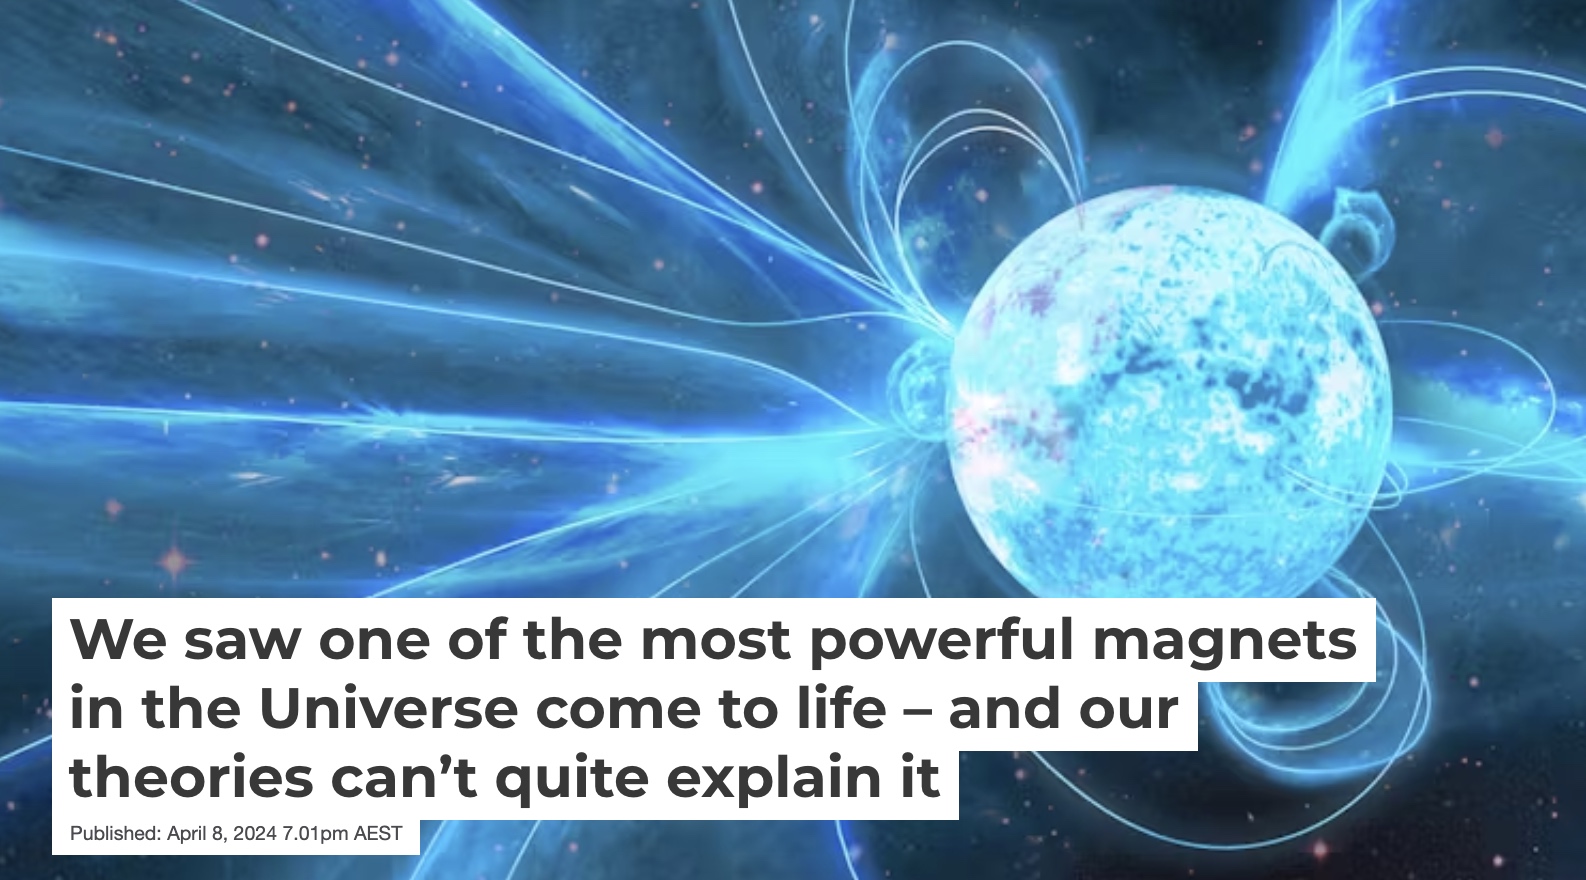 Headline of the article in The Conversation, describing observations of a magnetar.